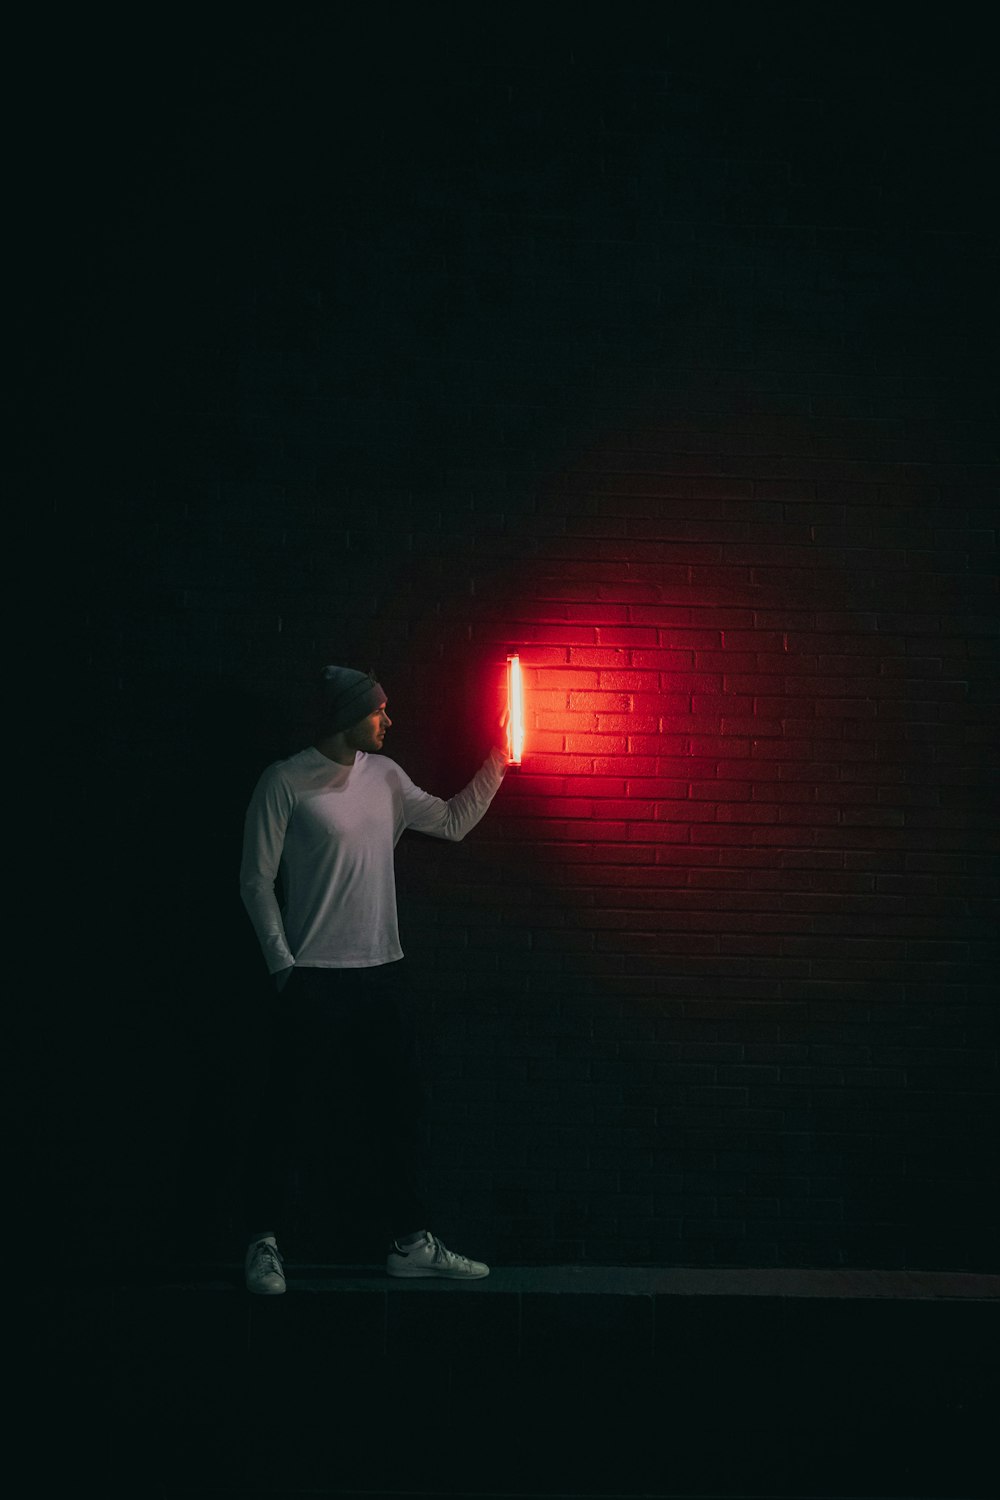 man in white shirt standing in front of red light